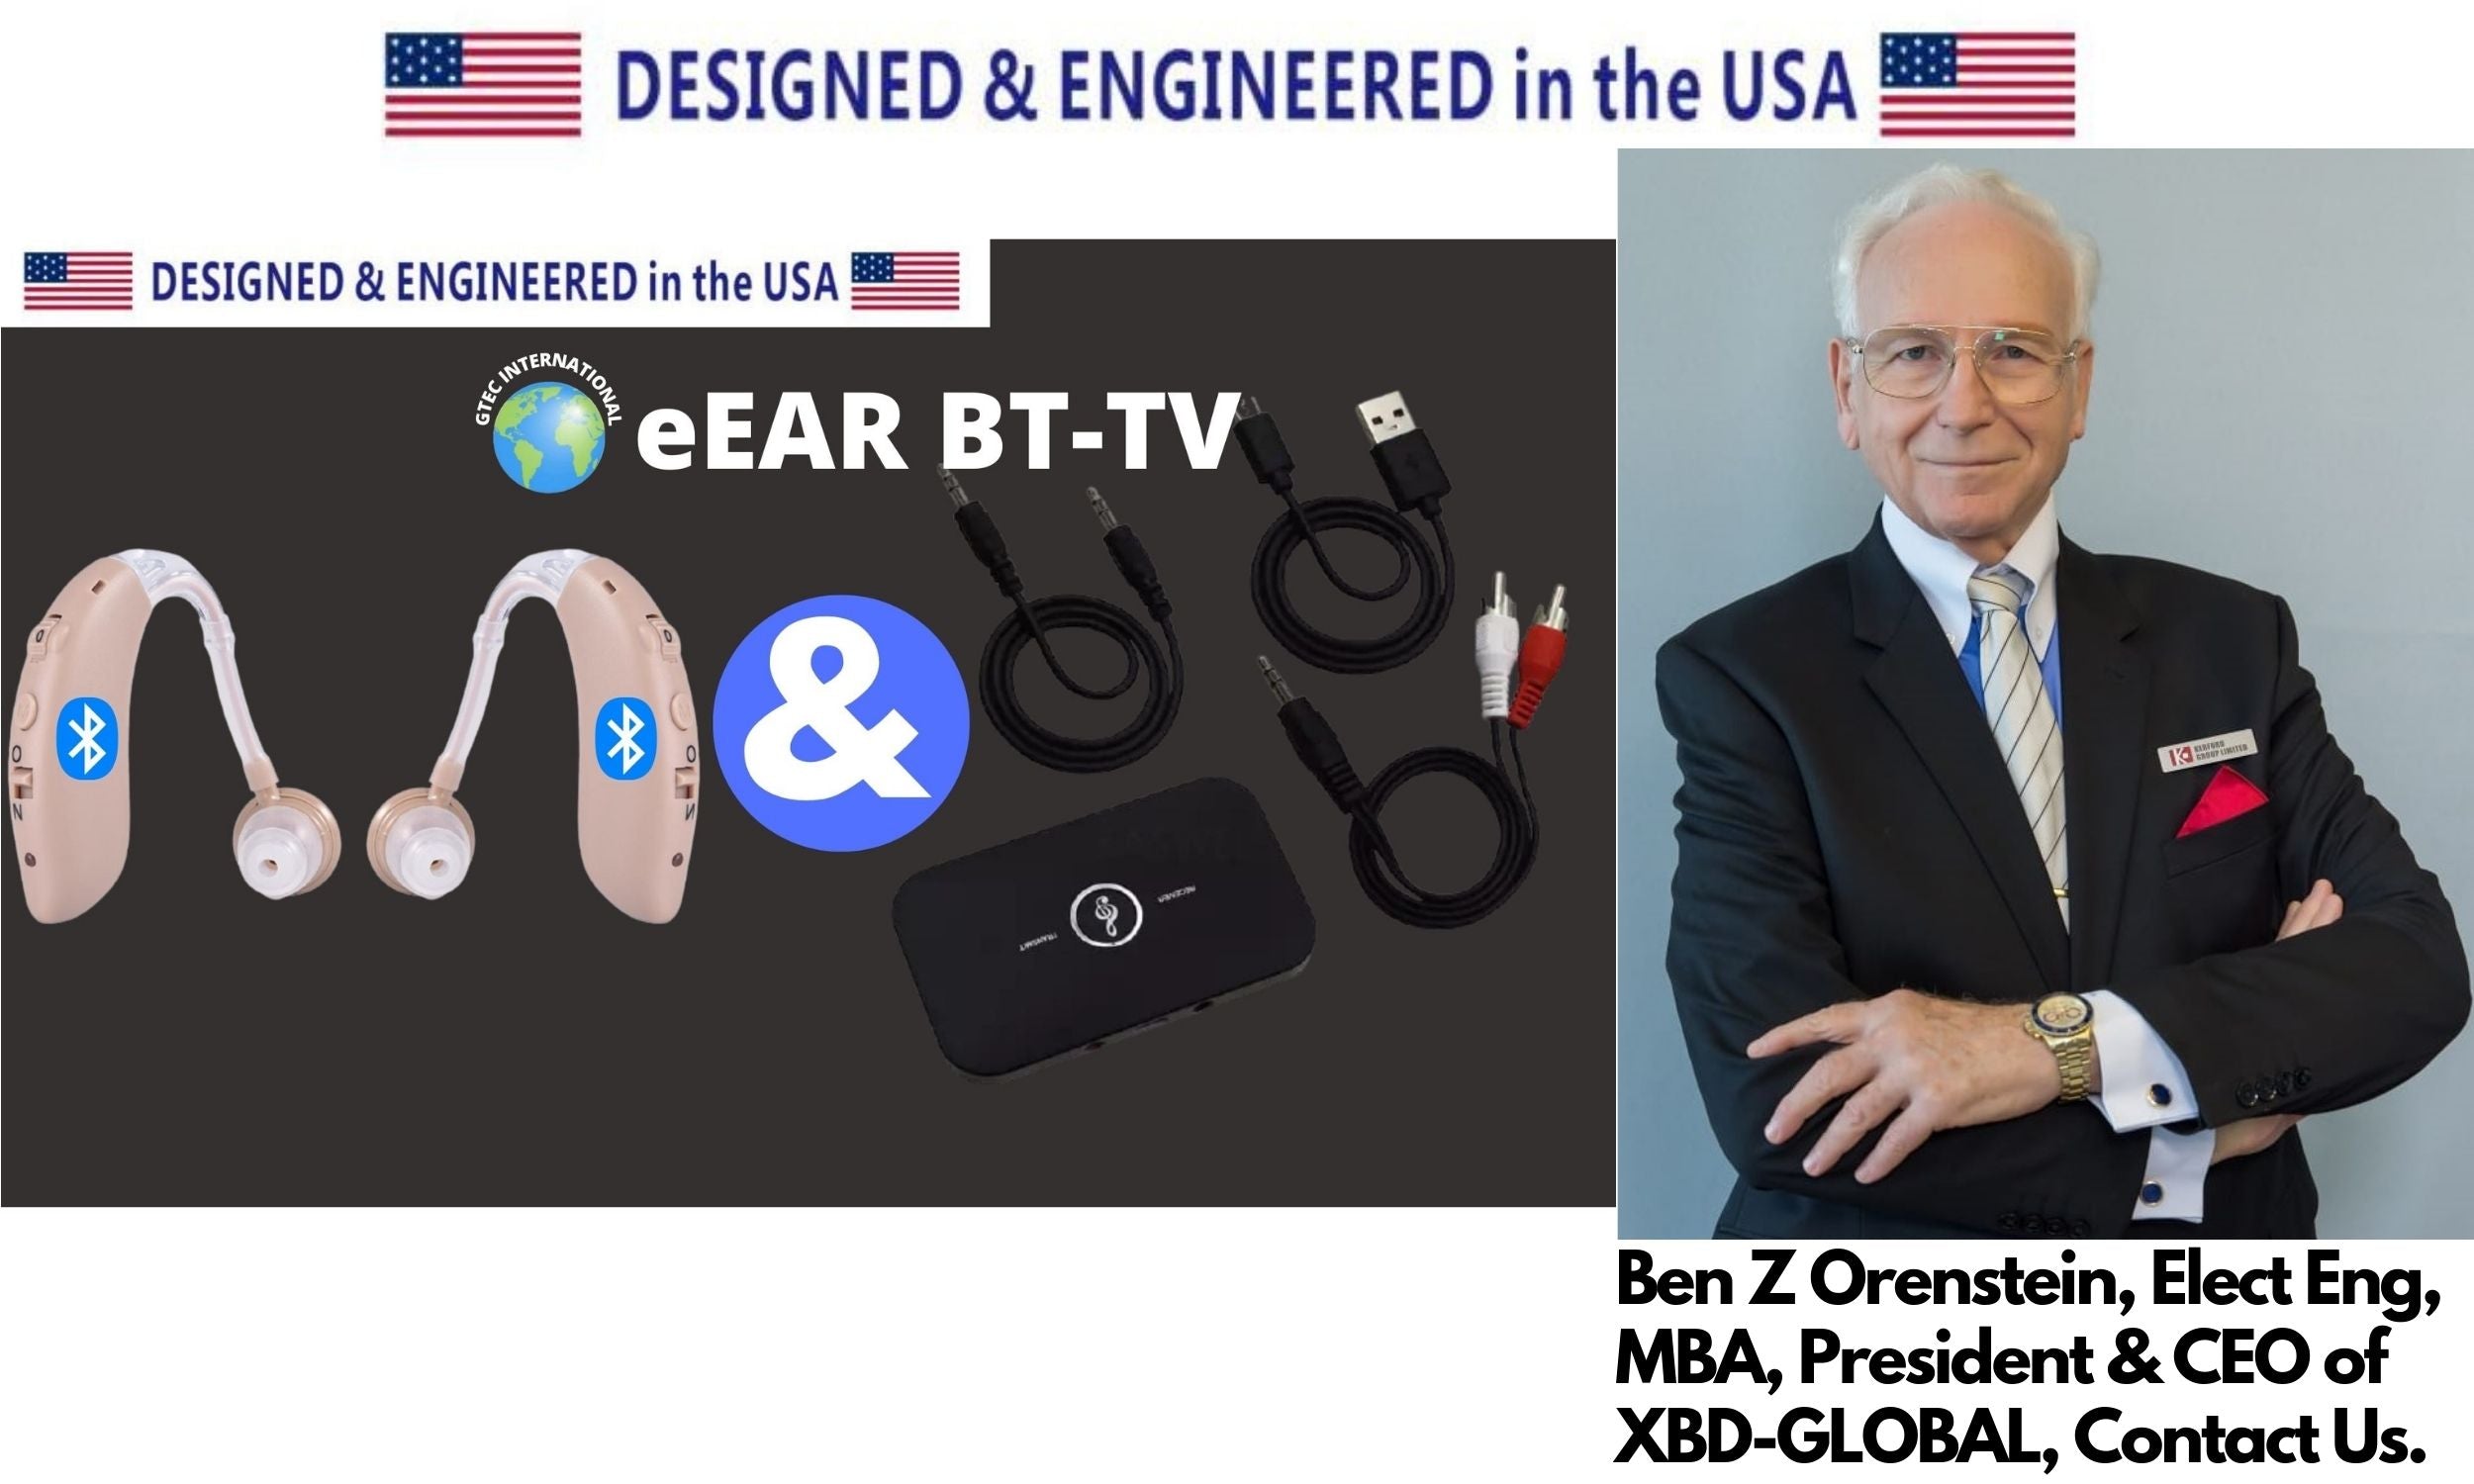 eEAR® eEAR-BT-TV-02 eEAR Bluetooth TV System Perfect Solution for TV listening for Hearing Aid Users & Hearing Impairment Designed and Engineered in the USA